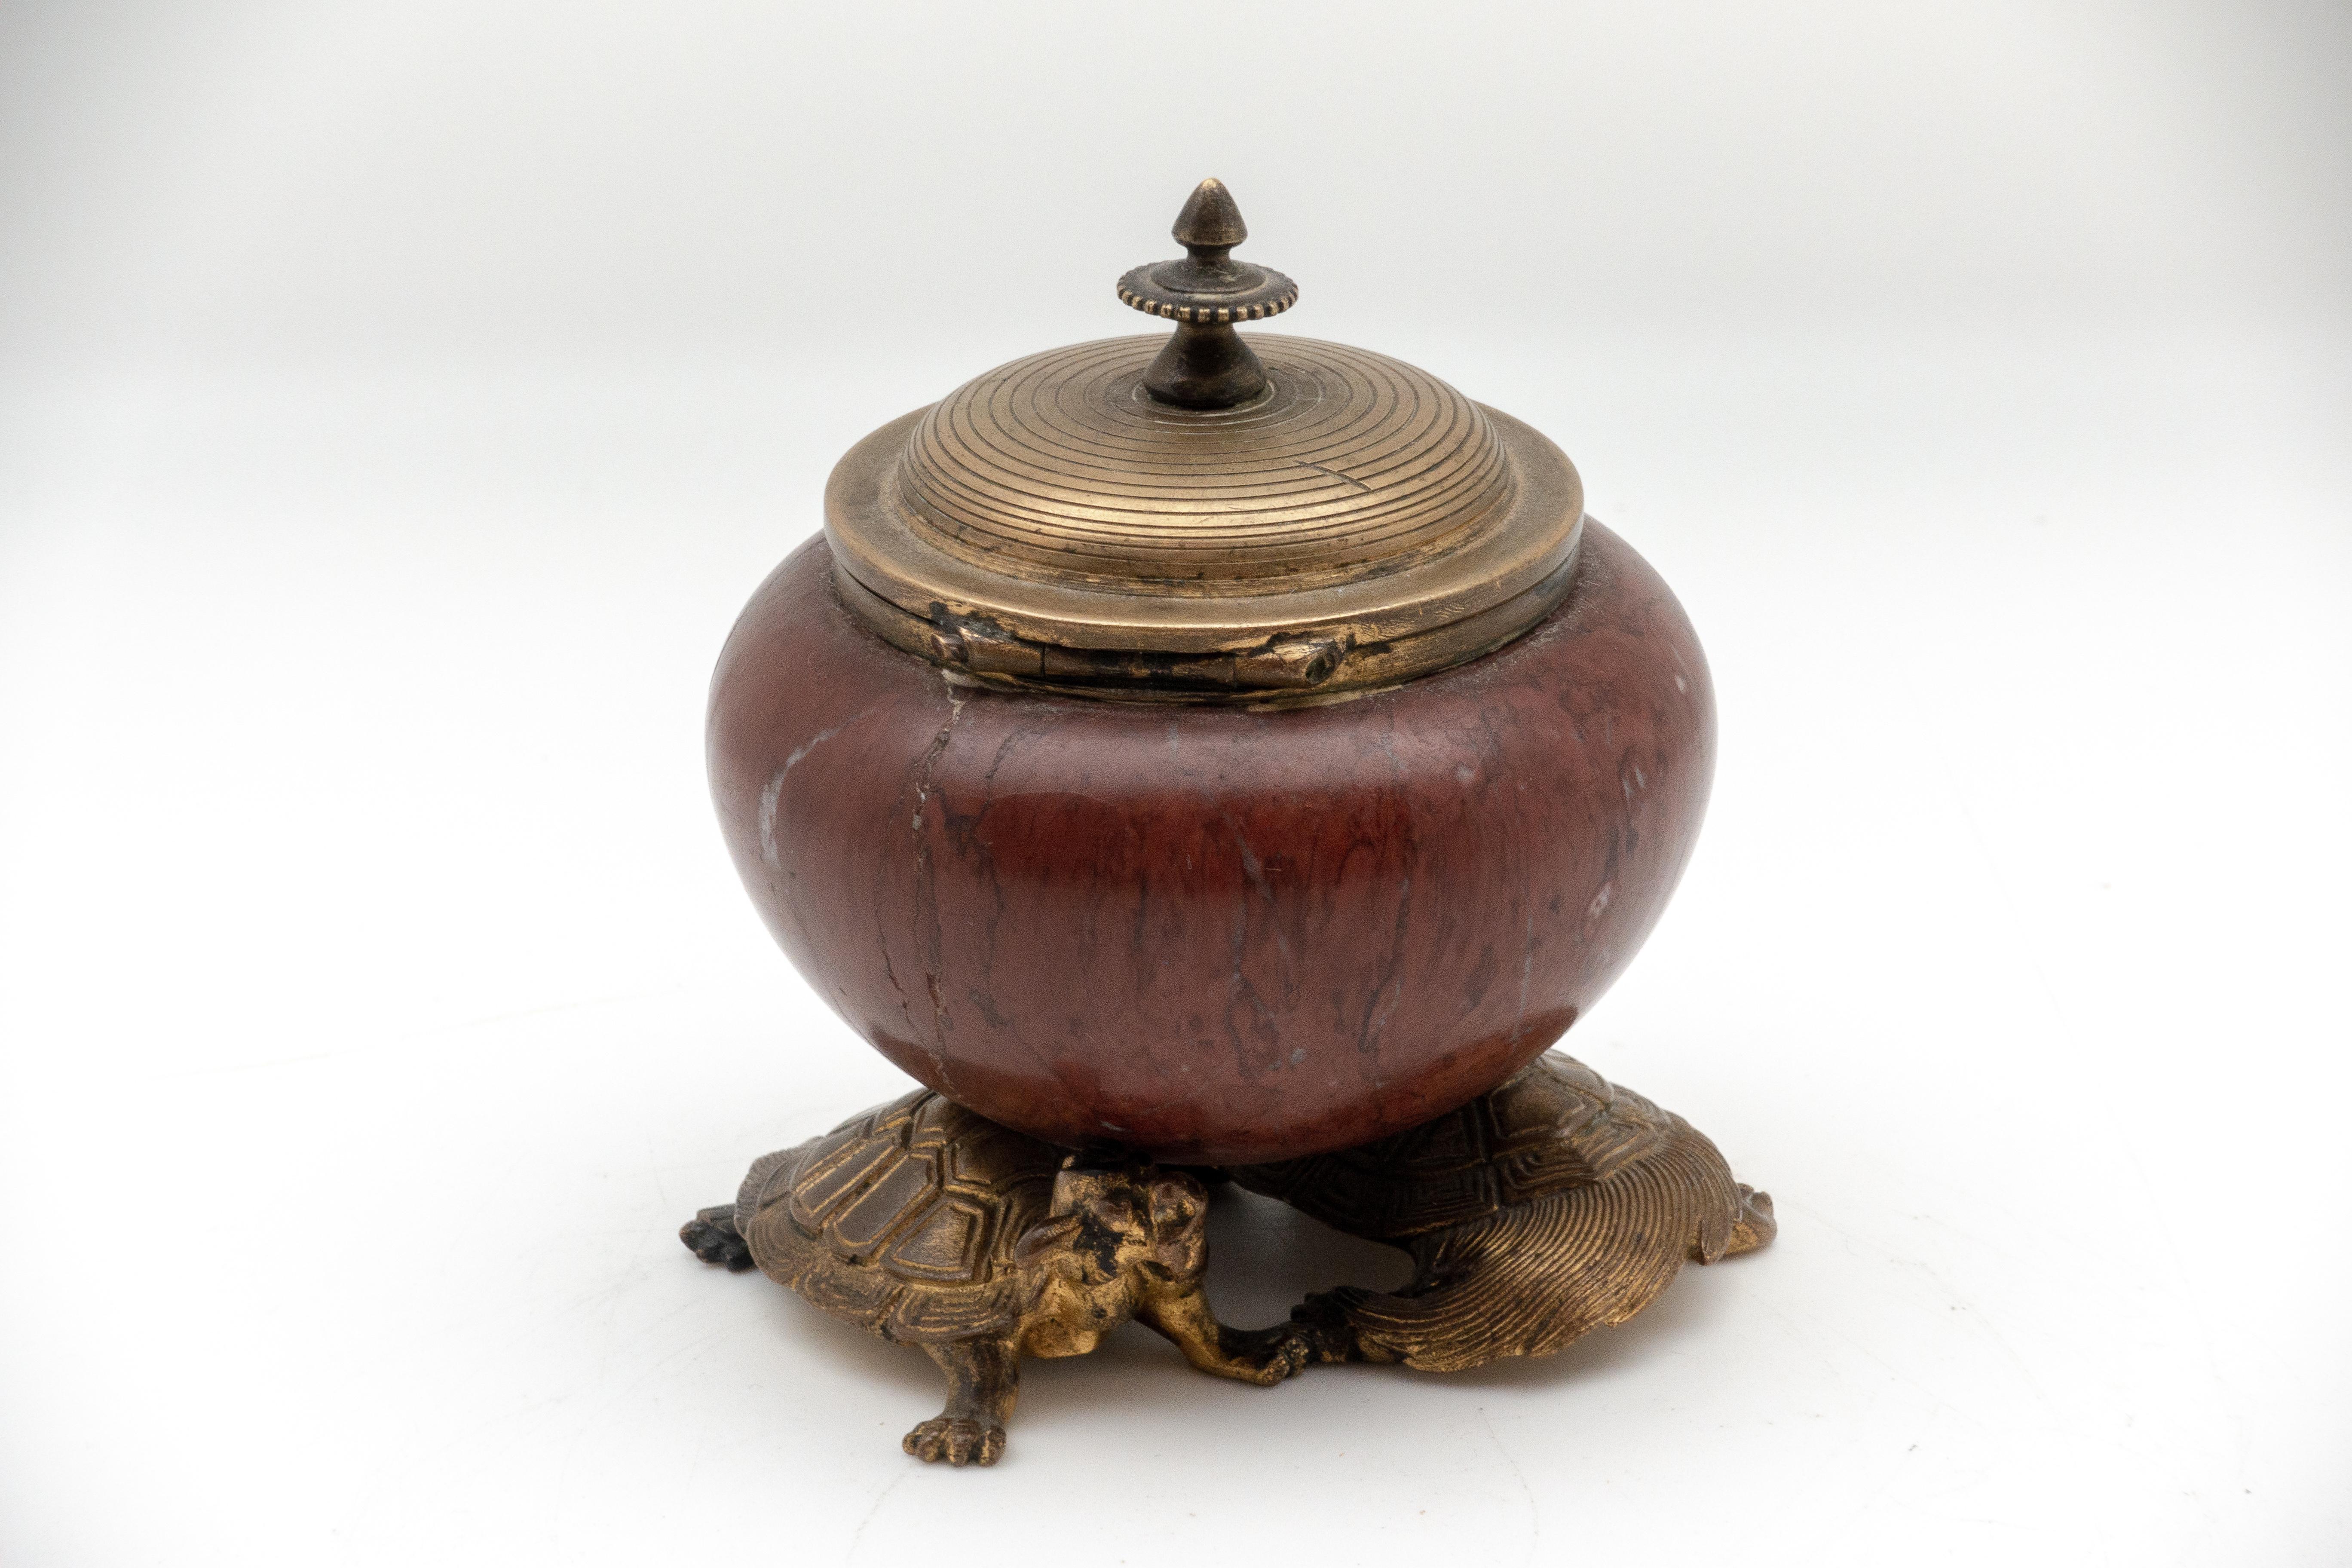 19th century French Barbedienne gilded bronze and rouge griotte marble inkwell by Edouard Lièvre (French, 1828-1886). The 